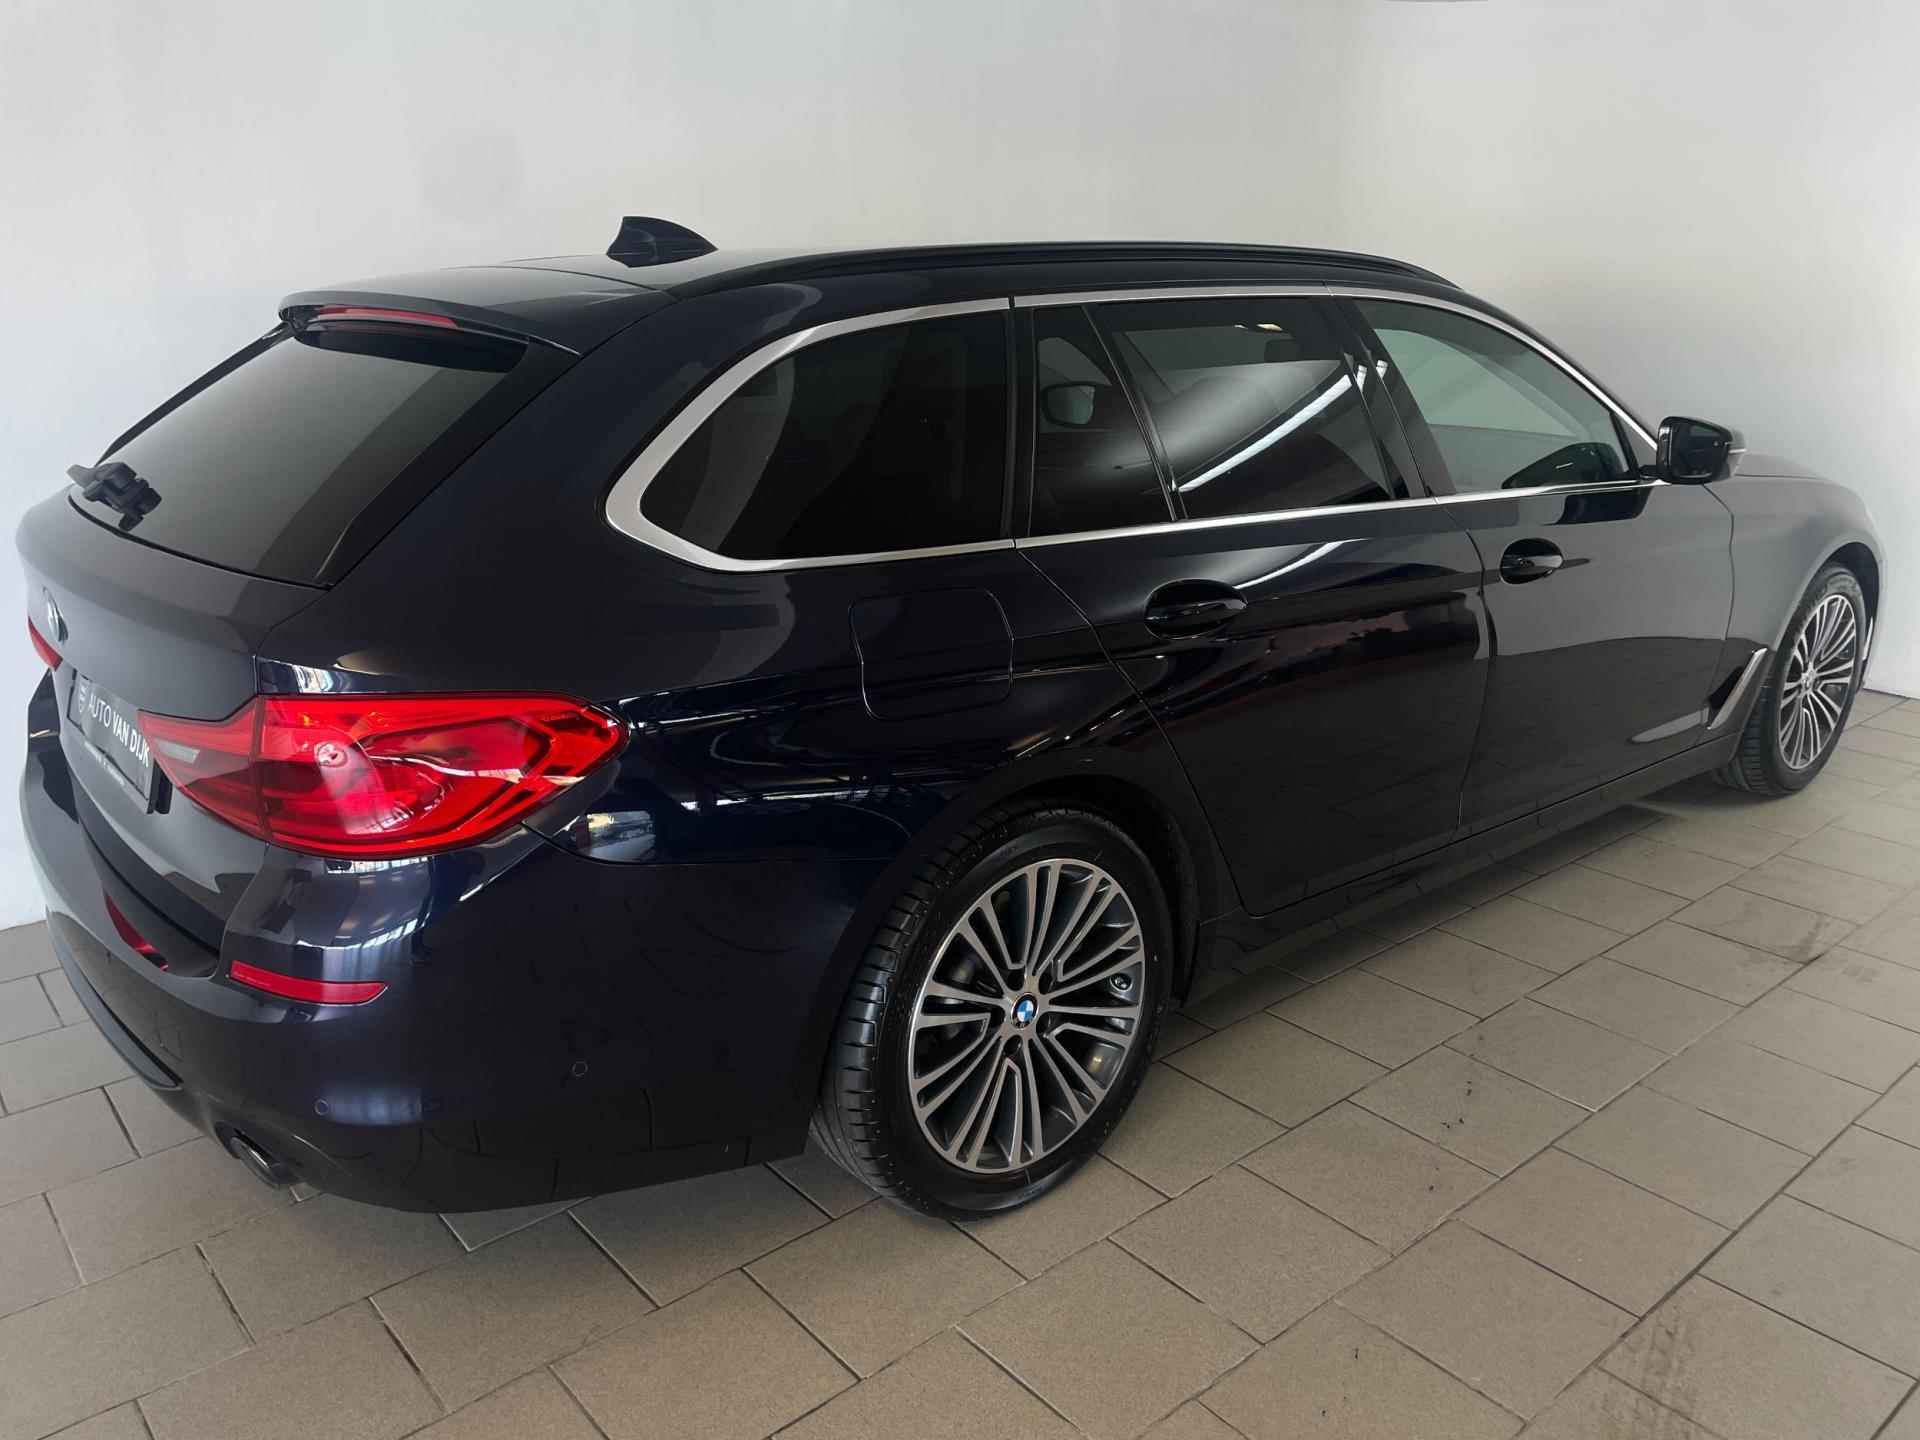 BMW 5-serie Touring 520i High Executive AUTOMAAT NAVI CRUISE BLUETOOTH LED VERL STUURVERW STOELVERW STOELVENT LEDER NIEUWSTAAT - 6/57